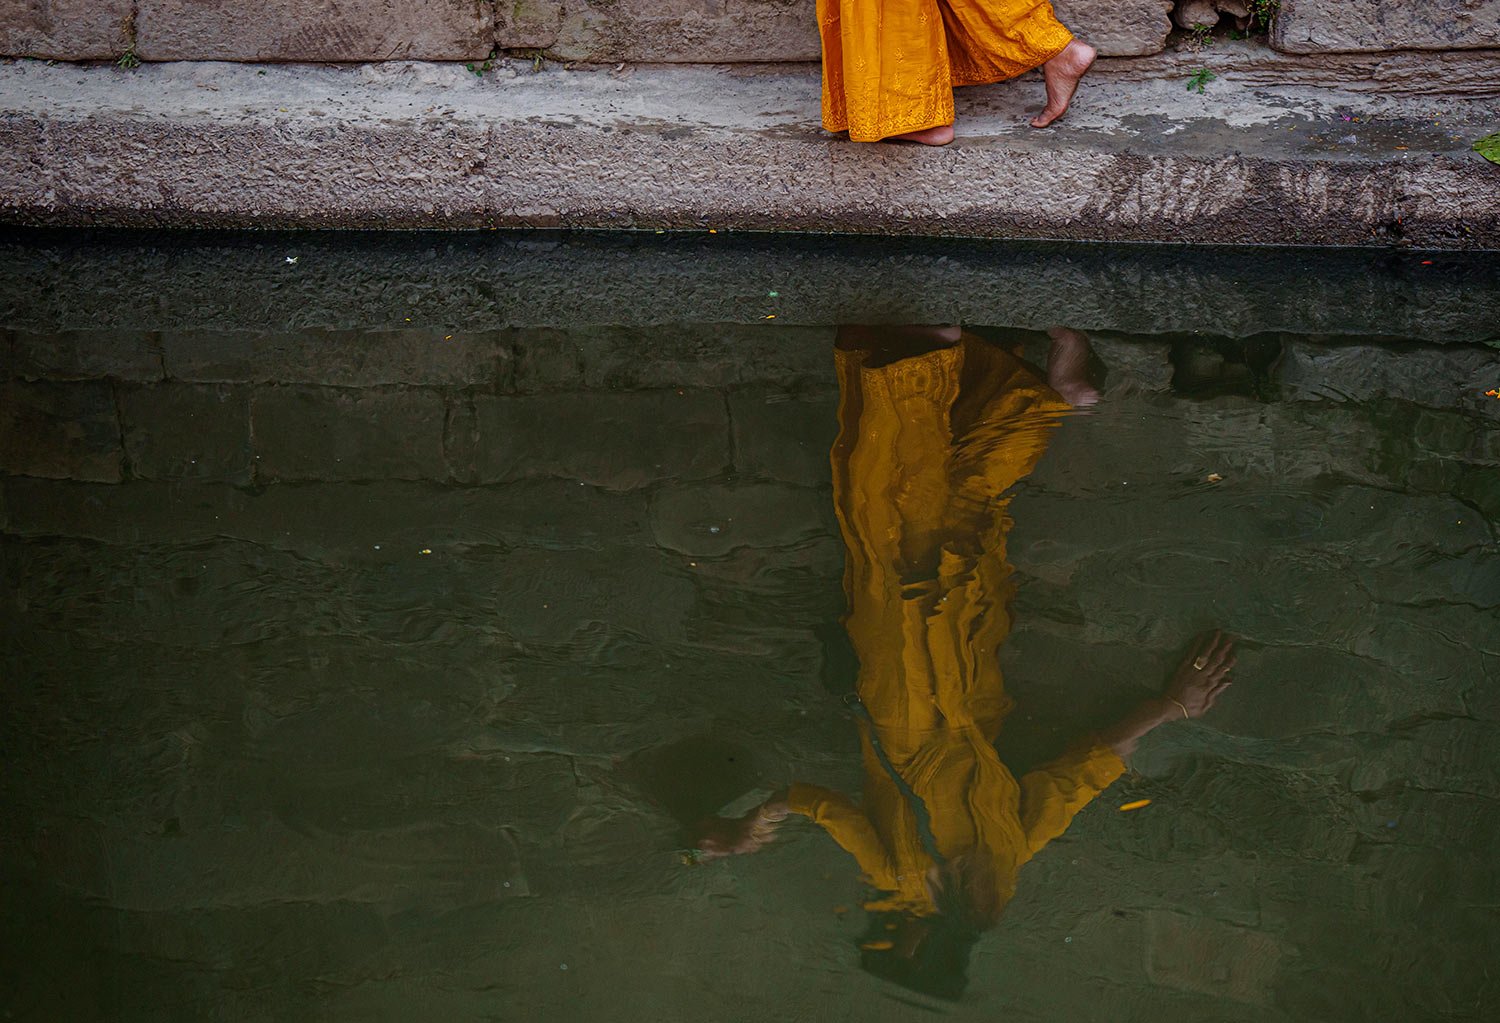  A Hindu devotee makes her way back through a narrow ledge on the banks of the Bagmati river after offering prayers in front of an idol of Astamatrika, representing eight divine mother goddesses, at the Pashupatinath temple premises in Kathmandu, Nep